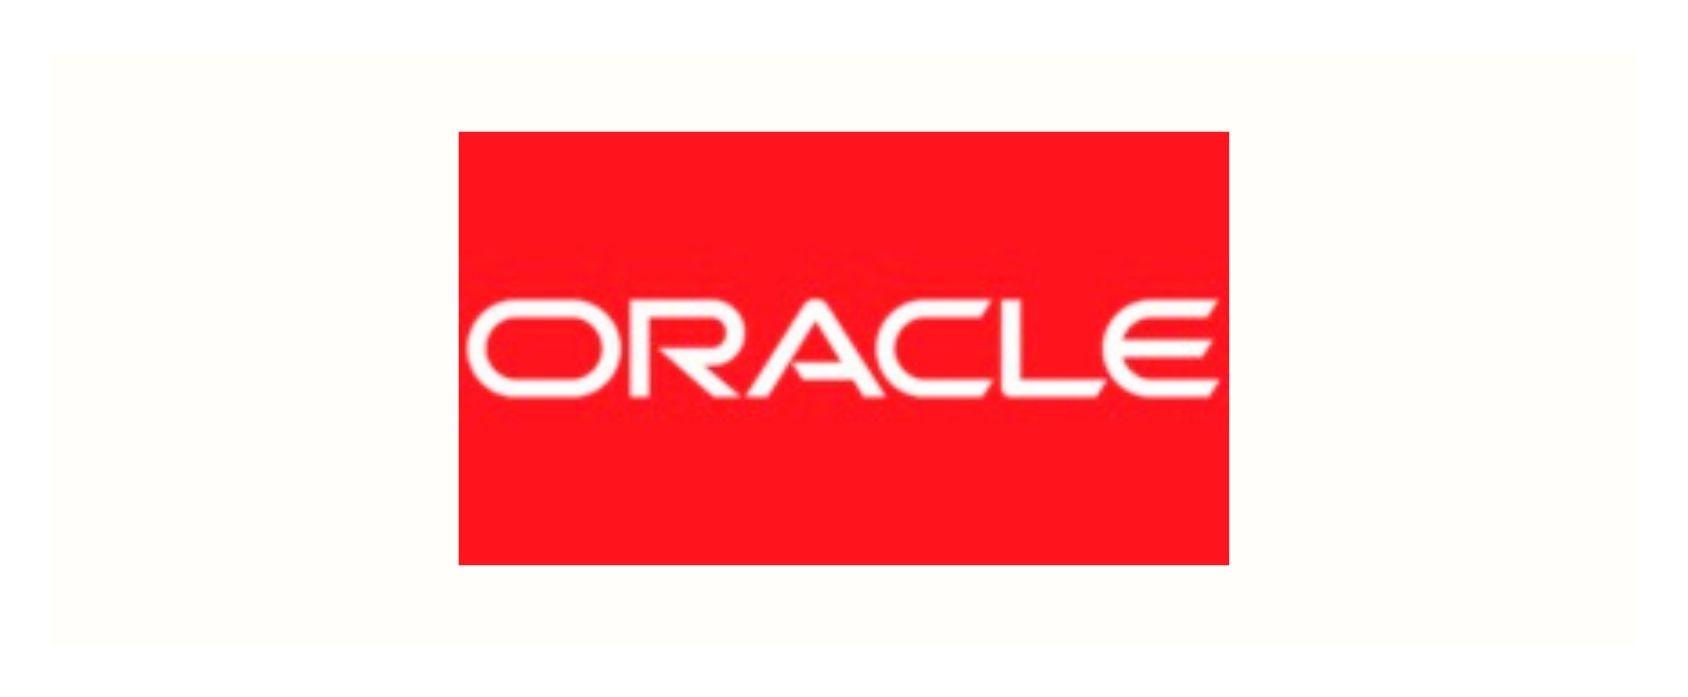 Click to access to all Oracle Partners